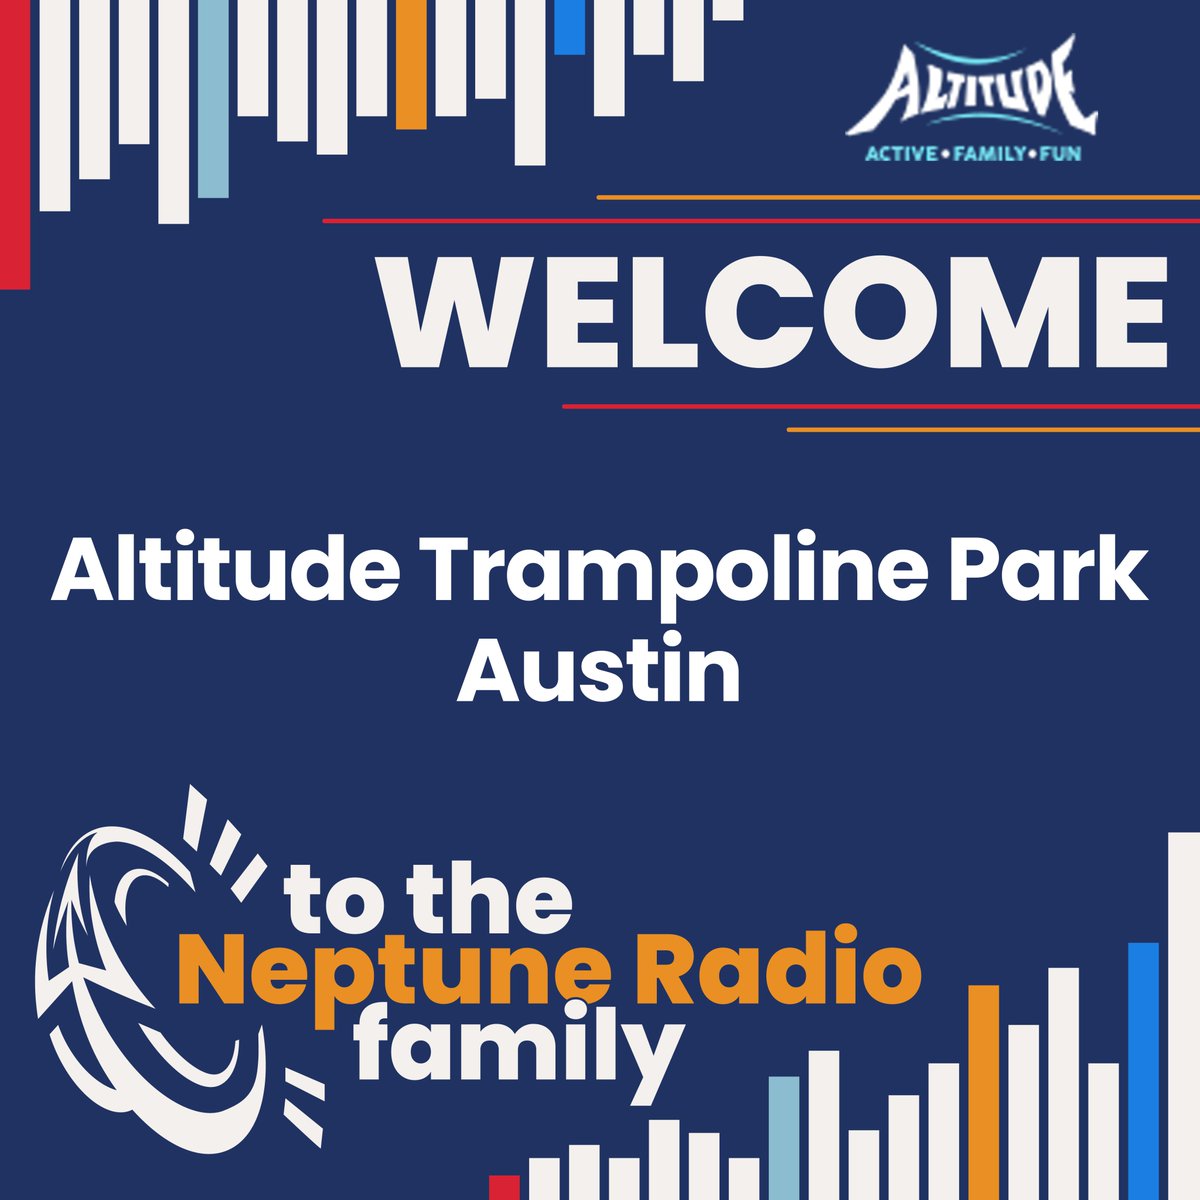 Altitude Trampoline Park–Austin is now a Neptune Radio partner! We’re excited to elevate the experience for your guests with 100% lyric-safe music and a professional radio sound they’ll love! Welcome to the Neptune family, Altitude Trampoline Park–Austin!